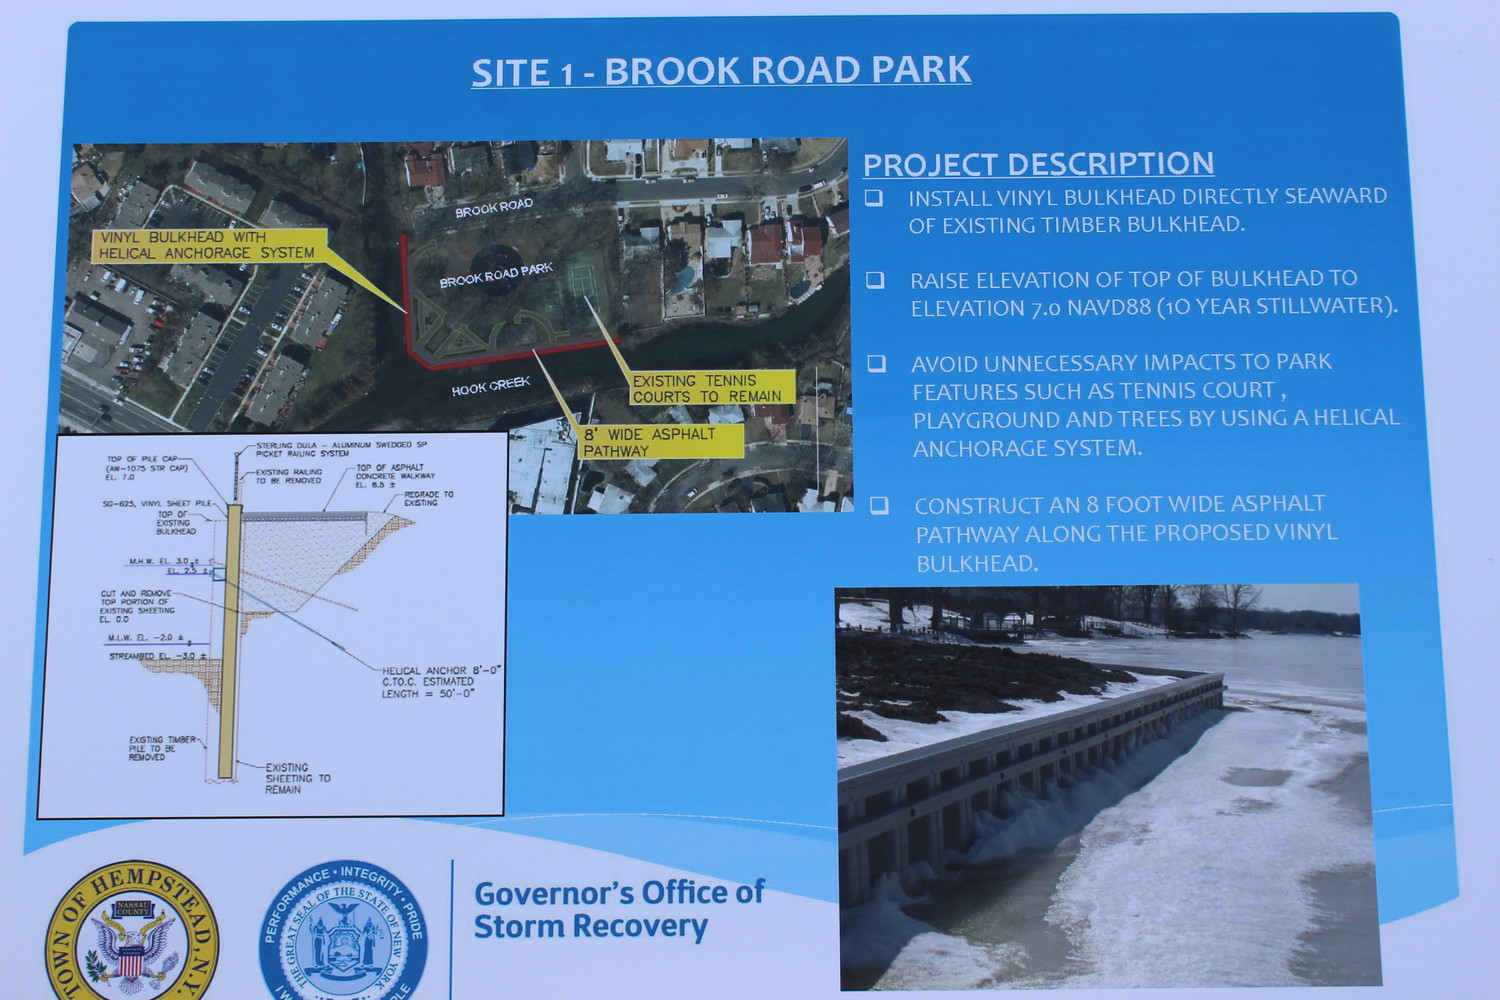 A sign detailed the scope of the Governor’s Office of Storm Recovery’s project.